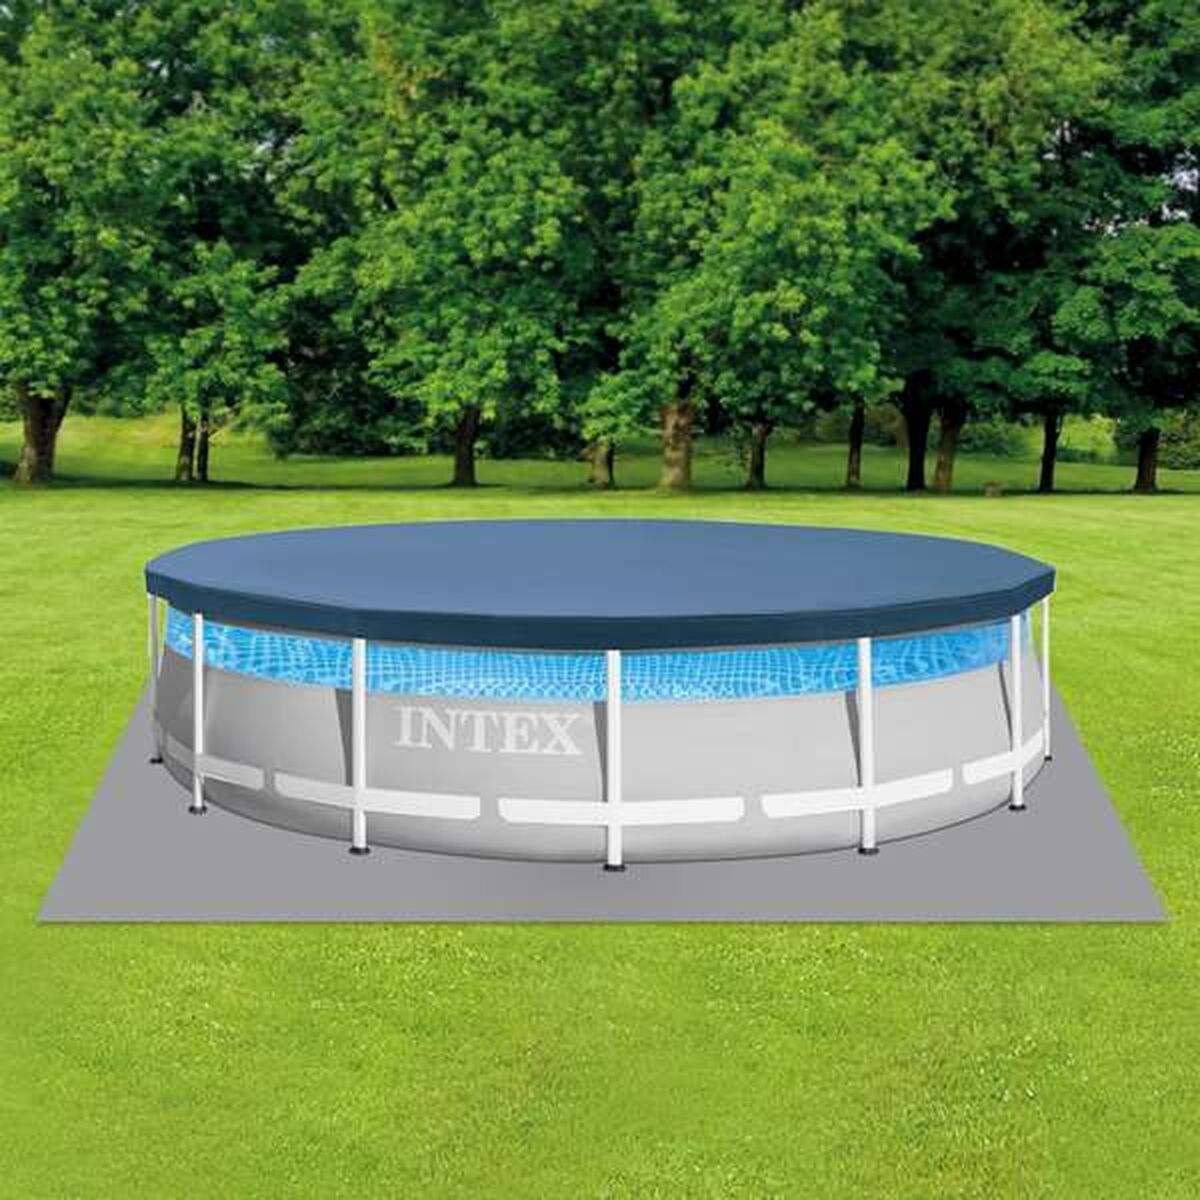 Piscina Desmontable Colorbaby Clearview Prism Frame 427 x 107 cm